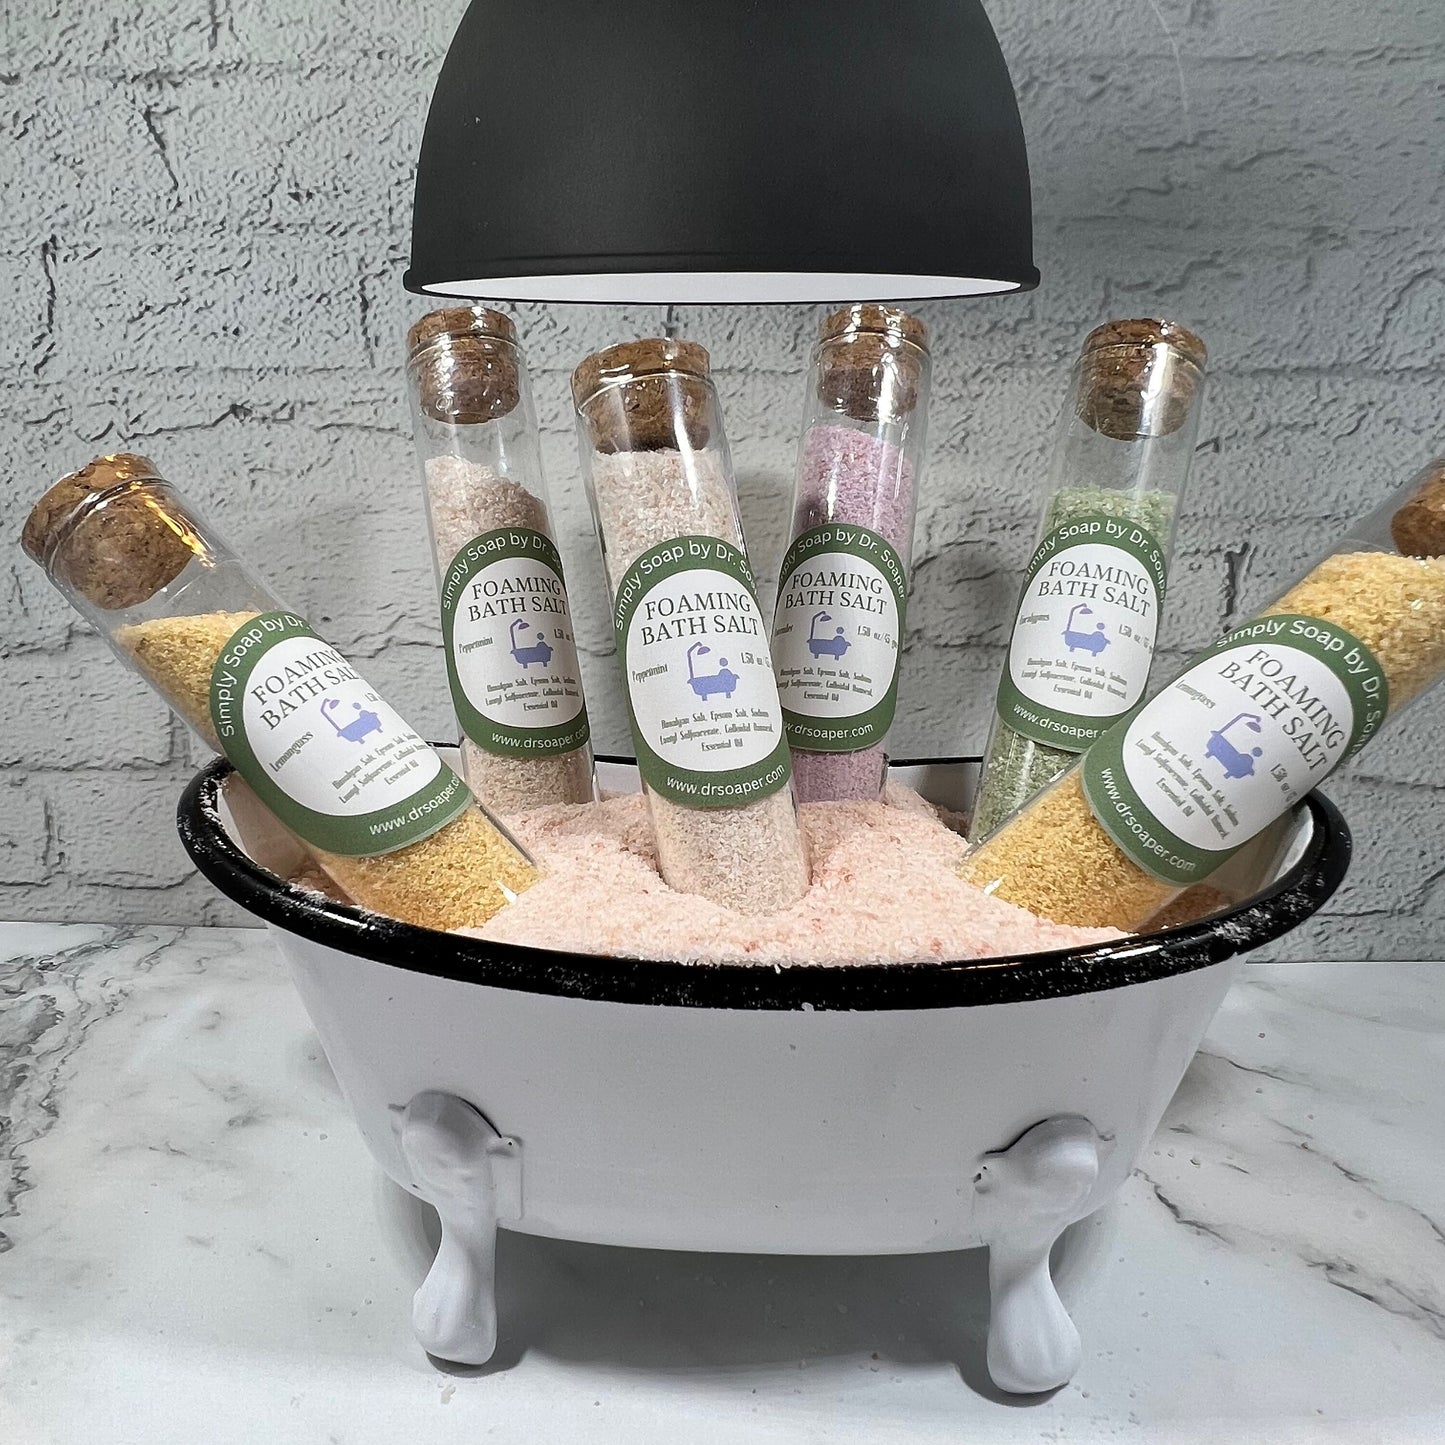 Zero Waste Single Use Bubbling Bath Salt in 4 Scents - Himalayan Salt, Epsom Salt, Colloidal Oatmeal - Travel-Friendly & Perfect for Gifting